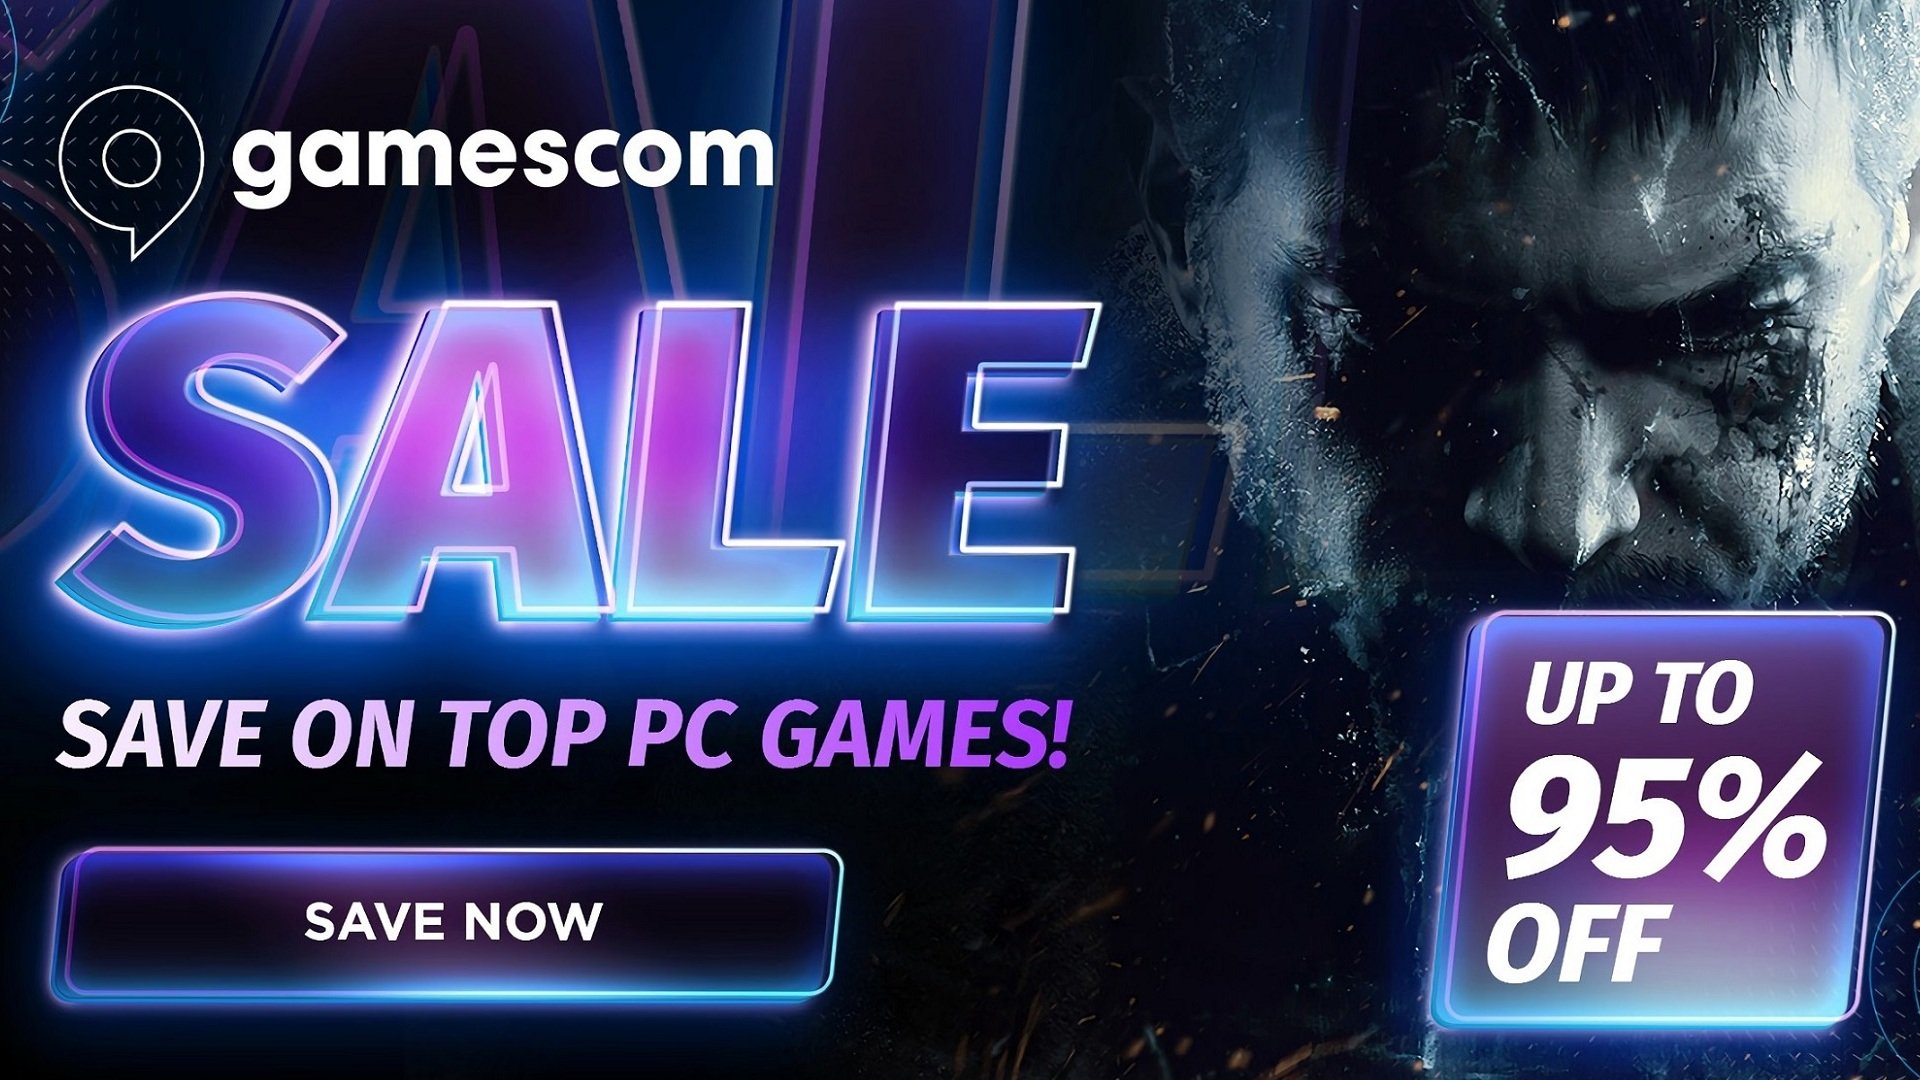 Origin Sims Sale - Save up to 75% on games from the popular franchise!